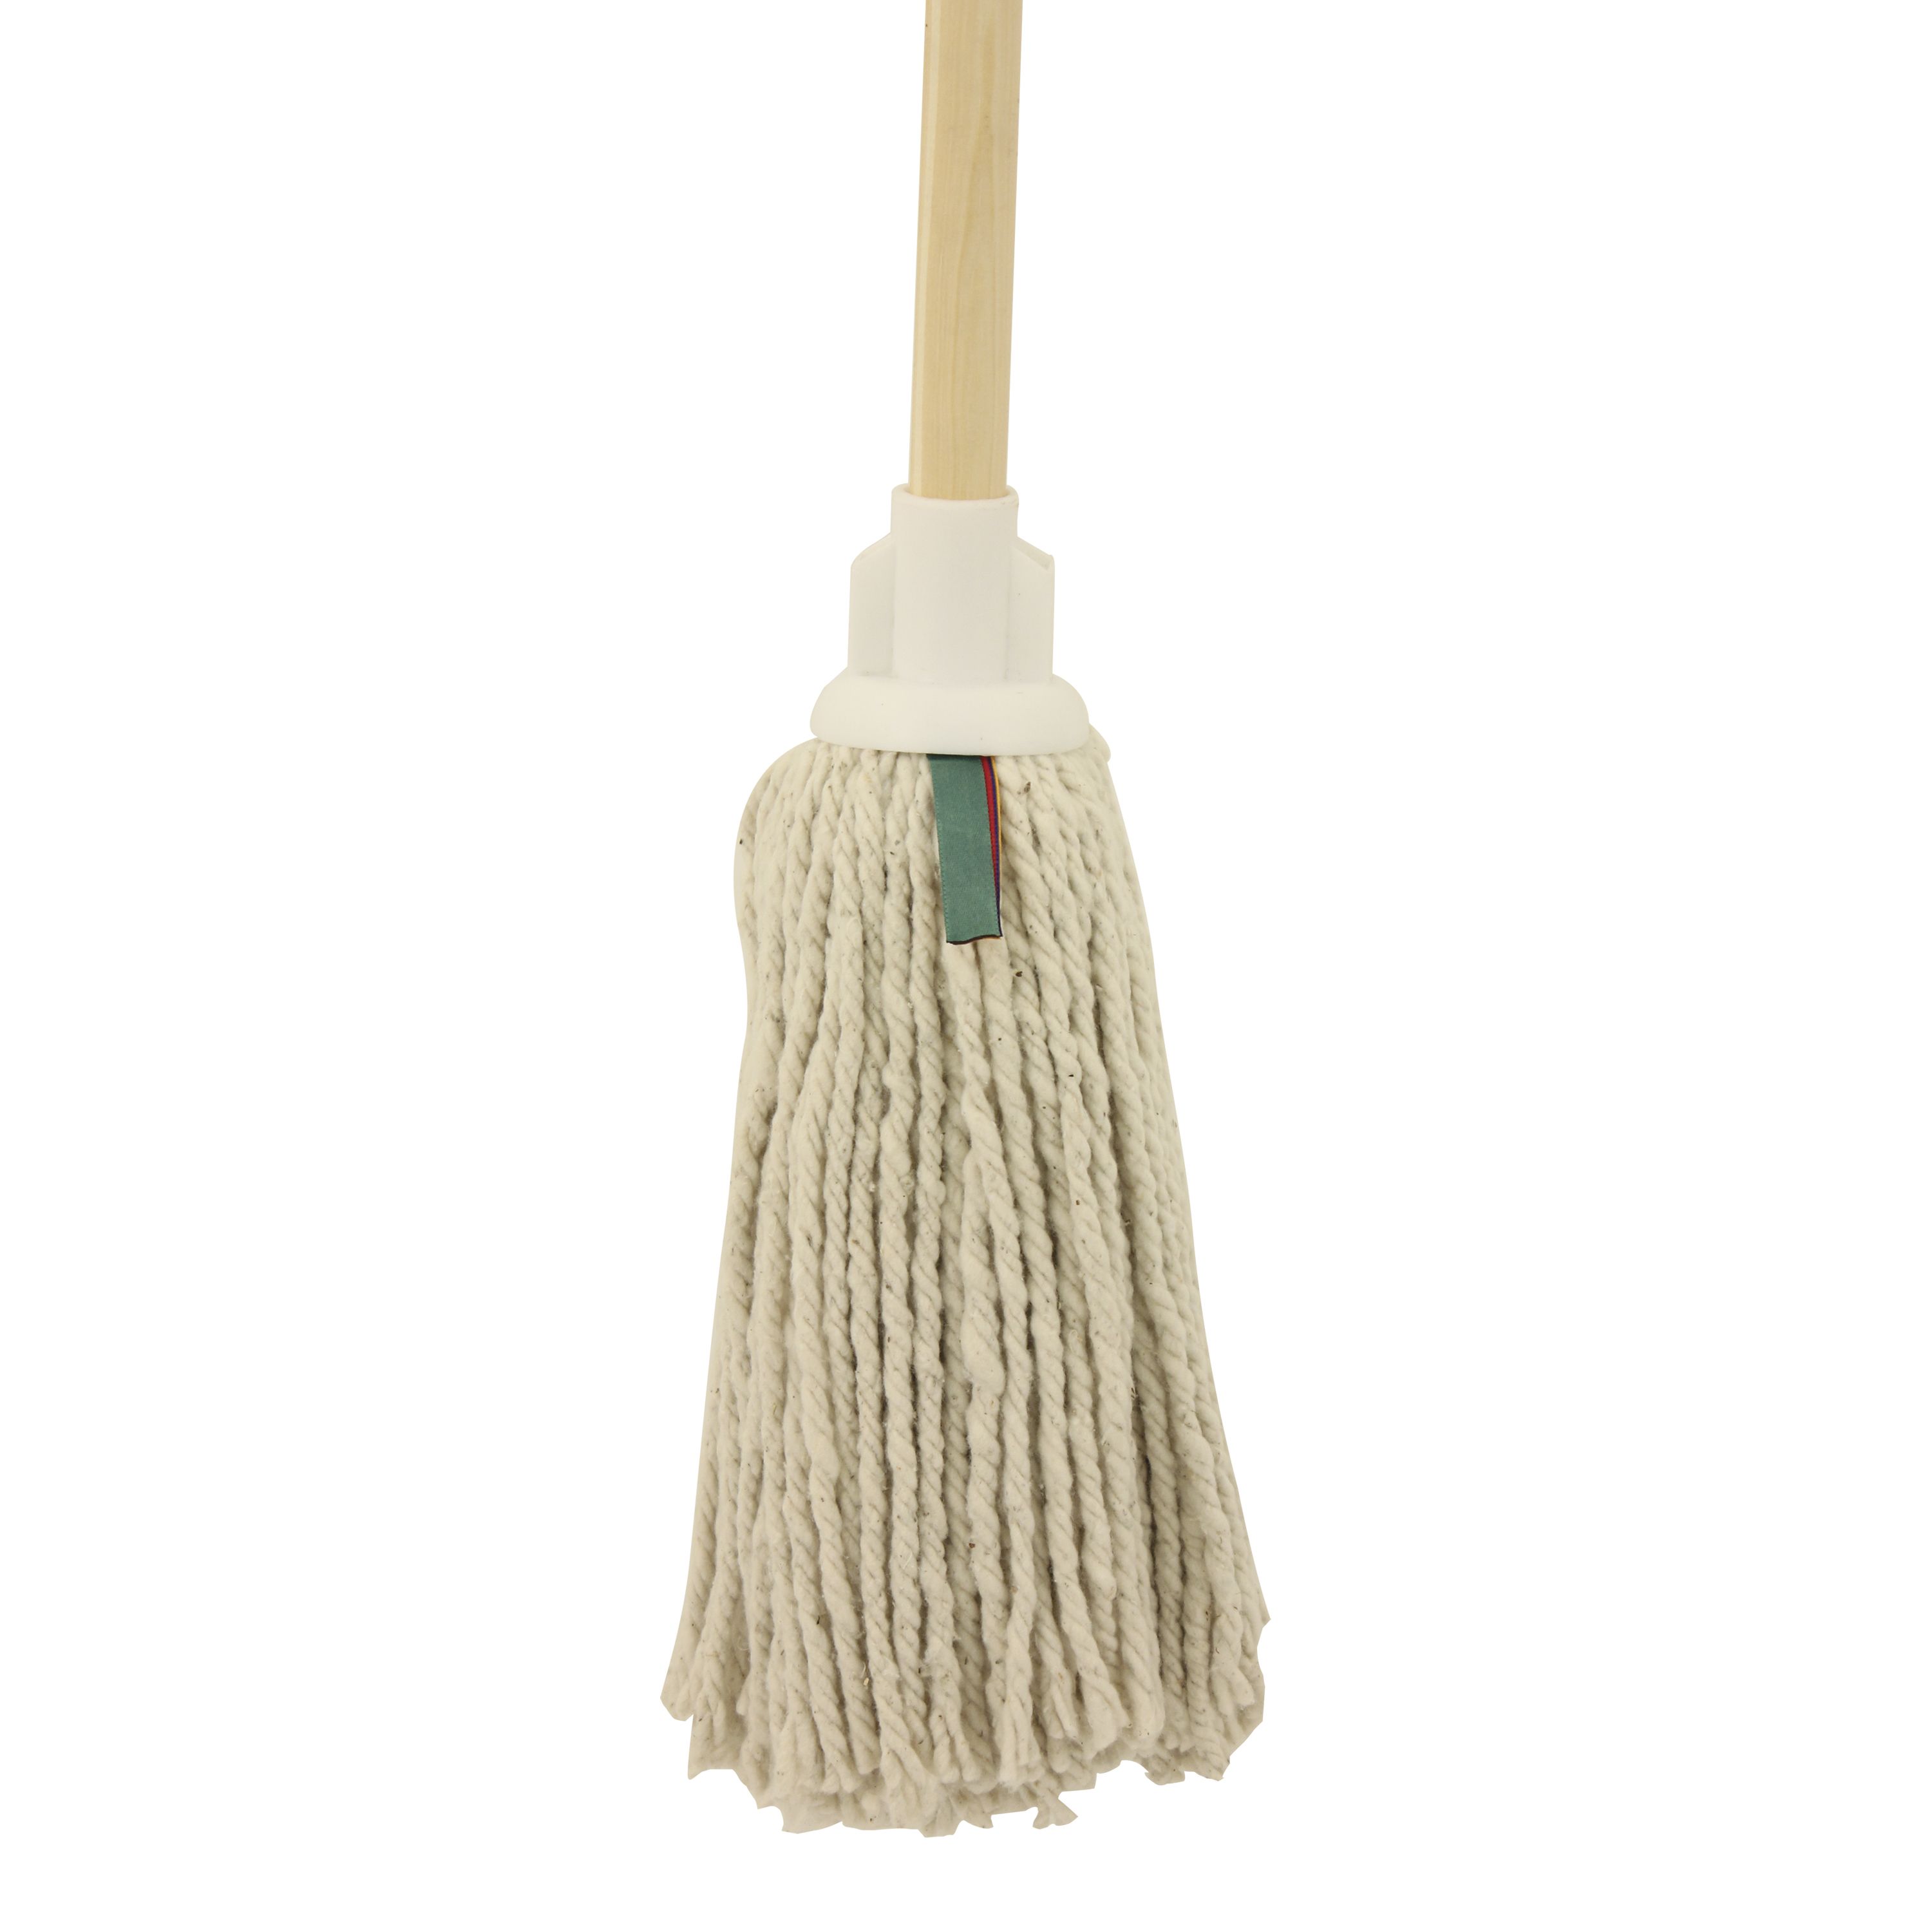 RS PRO 12oz White Yarn Mop Head for use with Aluminium and Wooden Handles